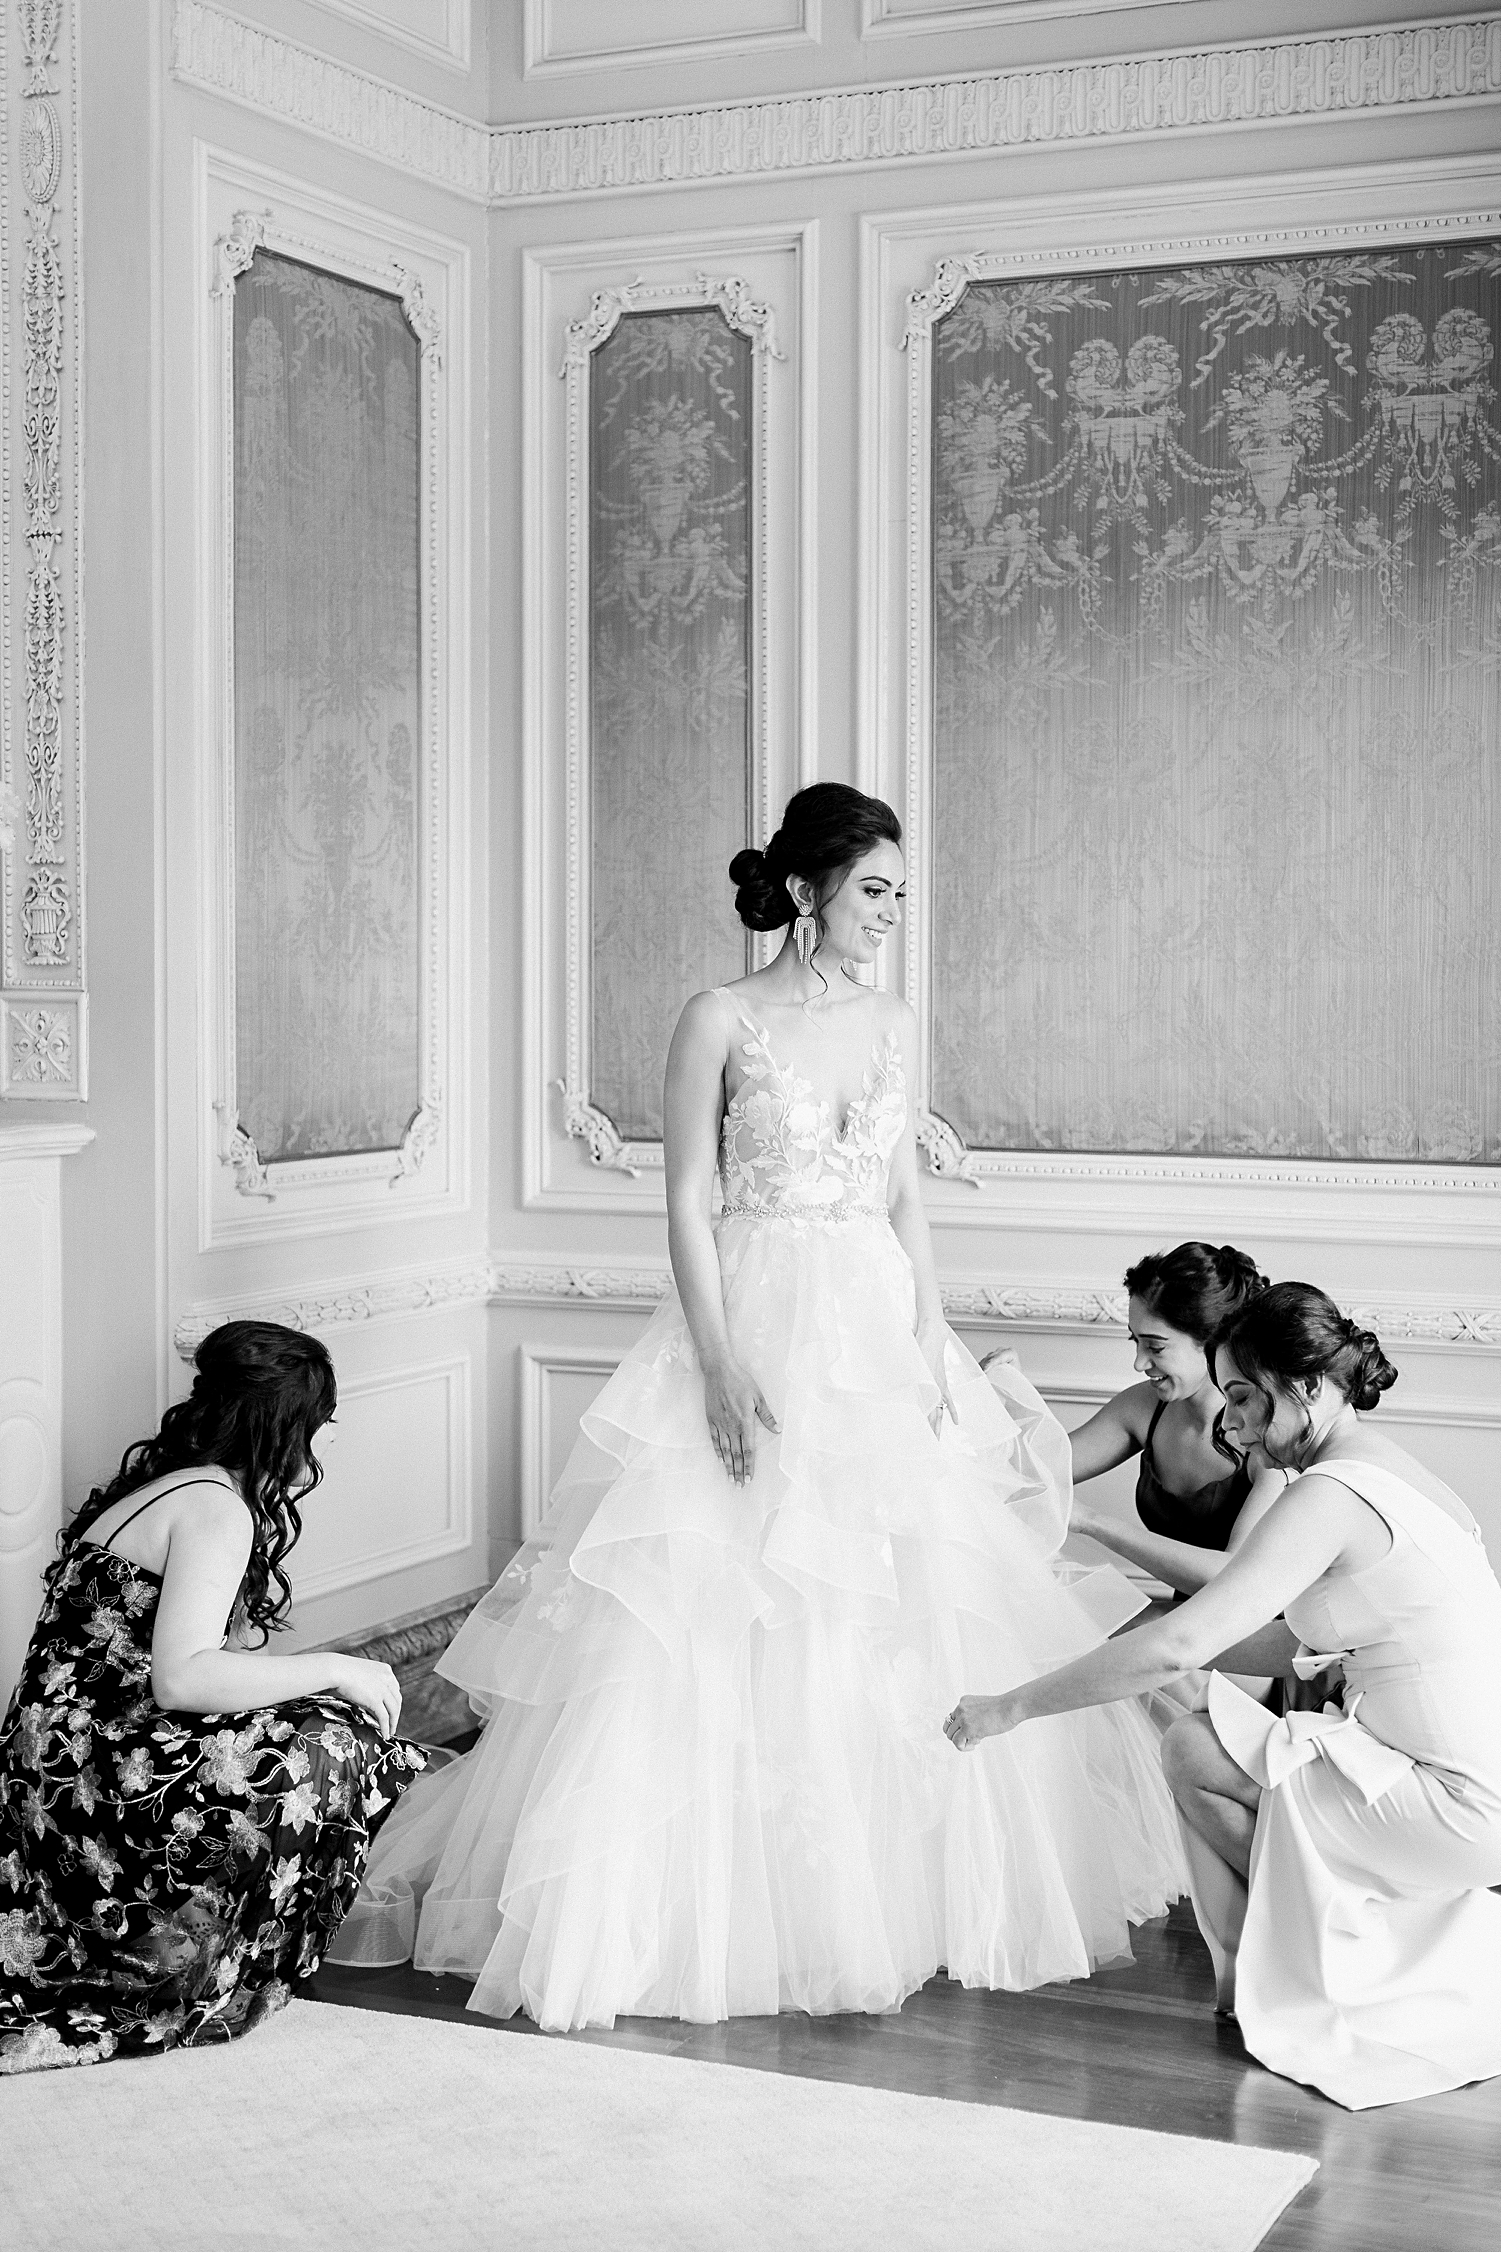 Bride getting help from bridesmaids fluffing wedding dress